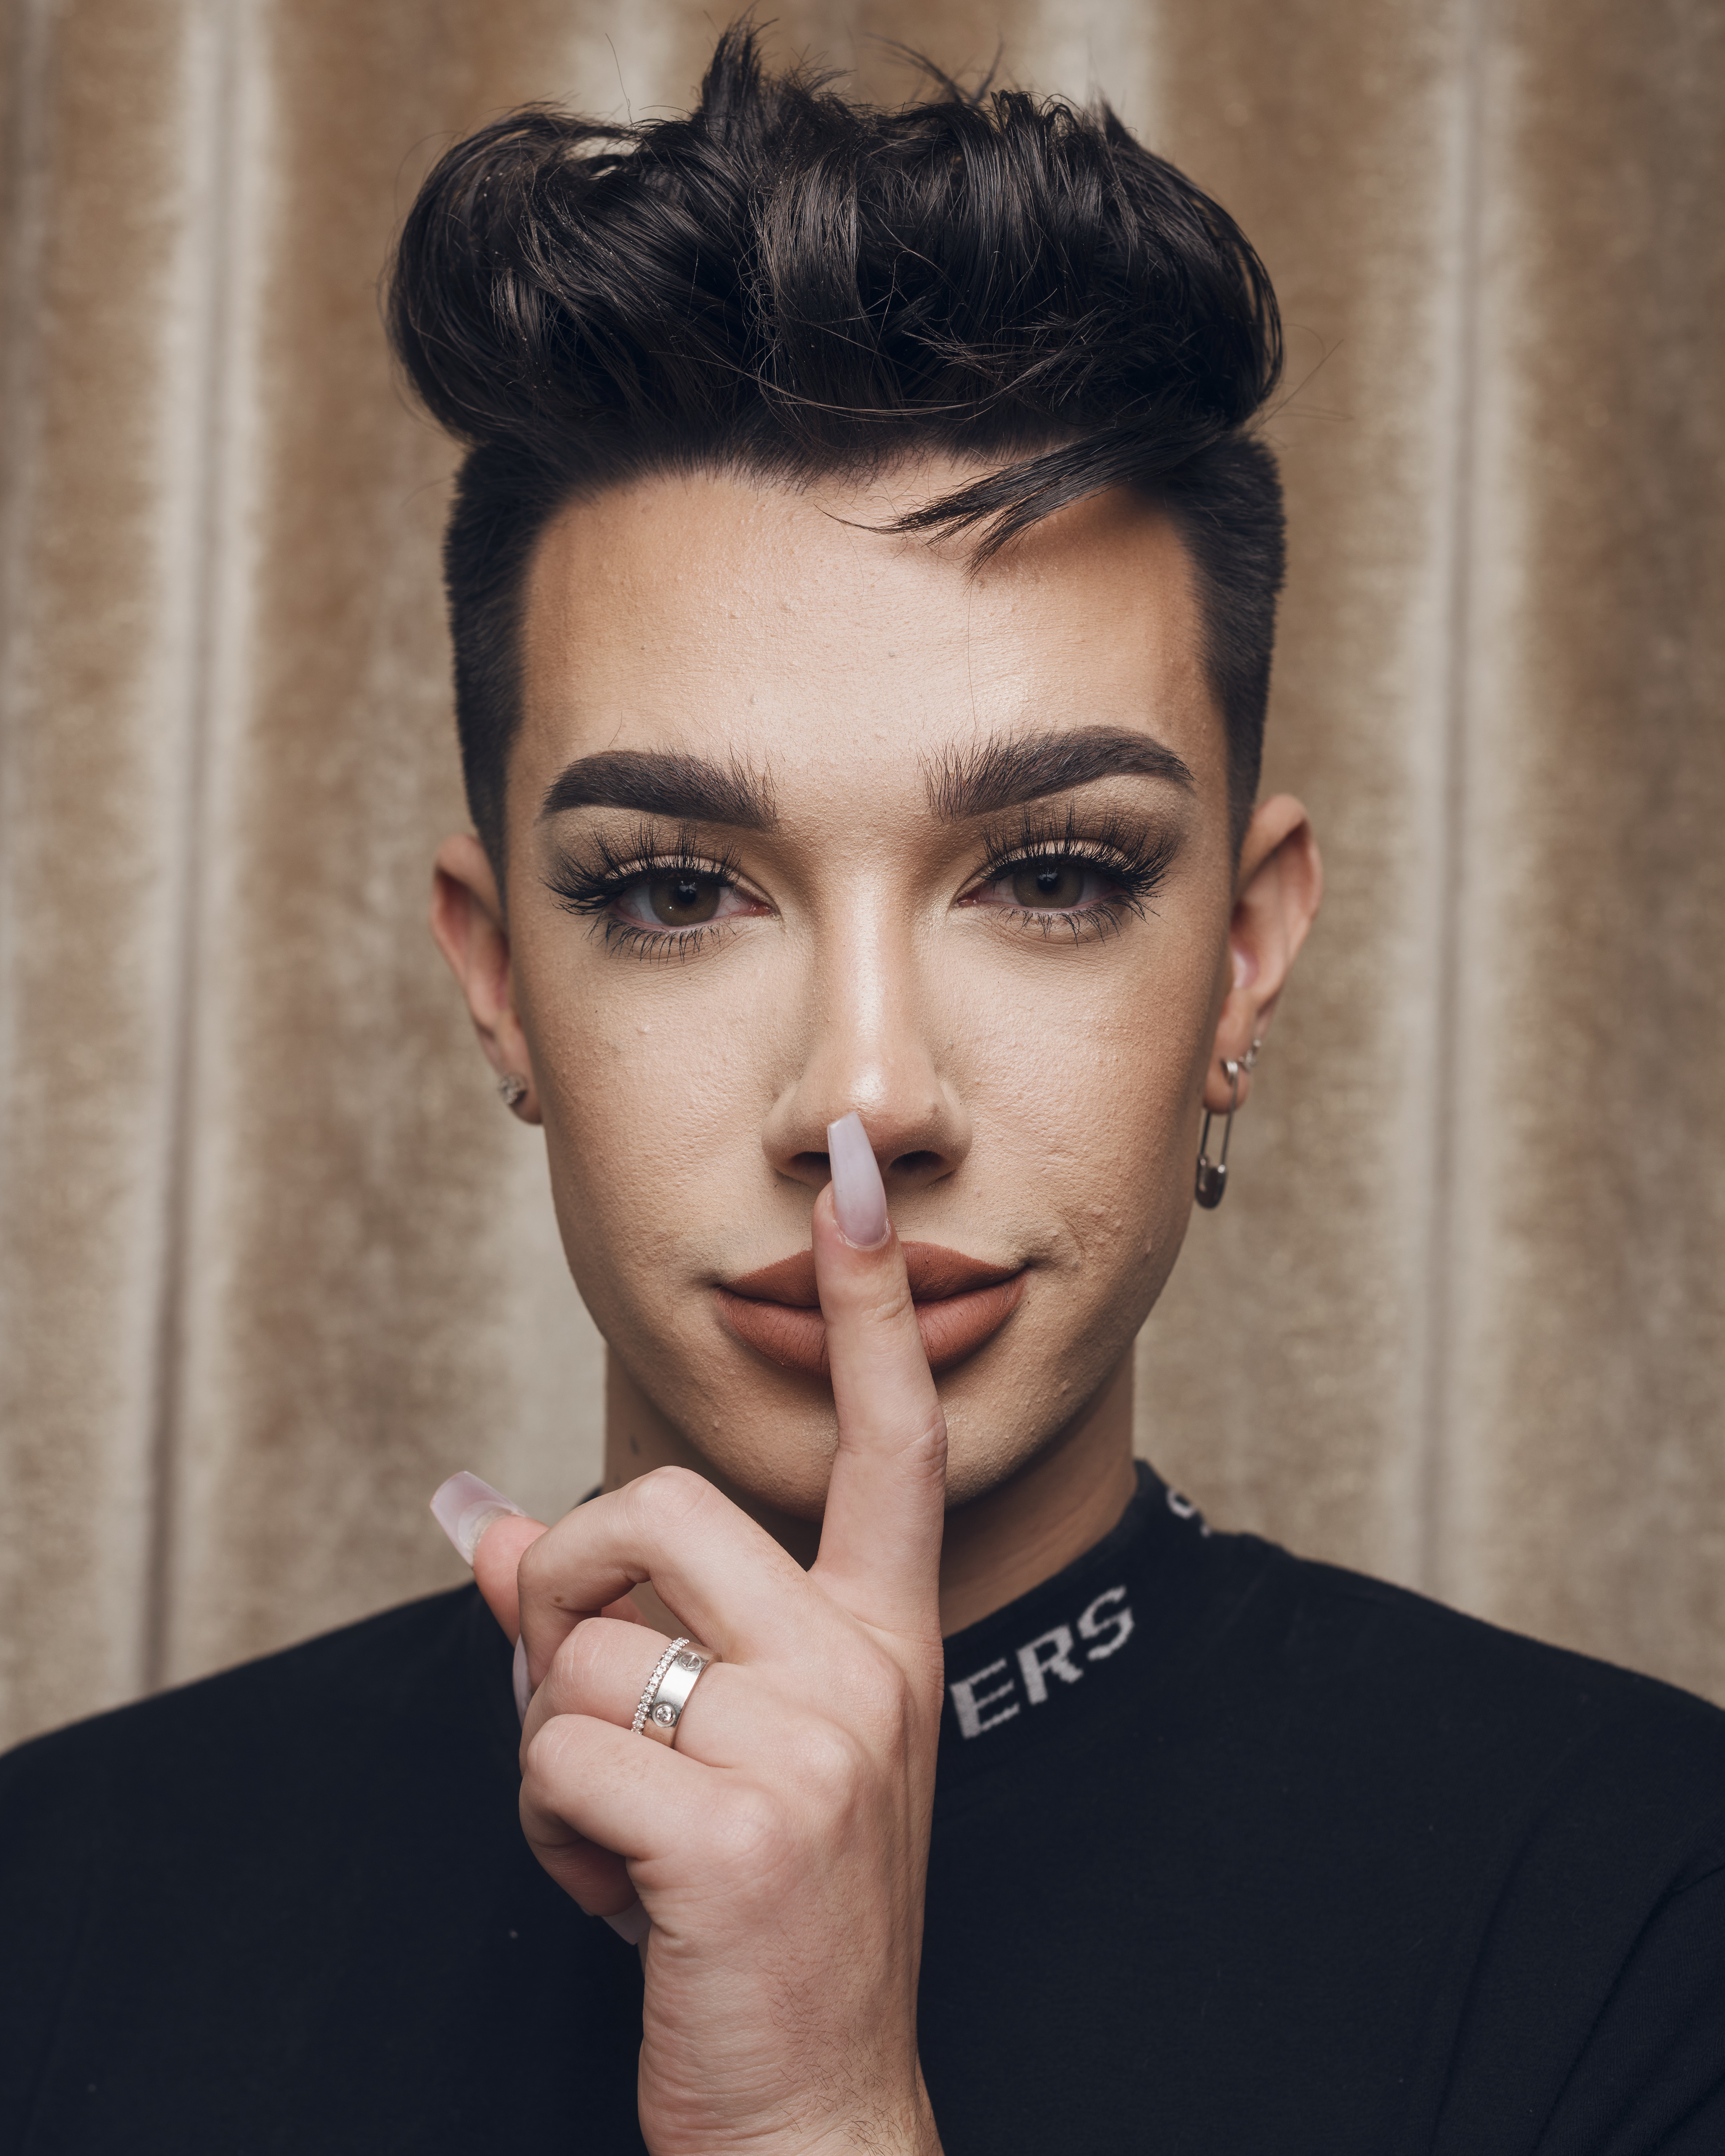 Beauty influencer James Charles made history when he became the first male ...